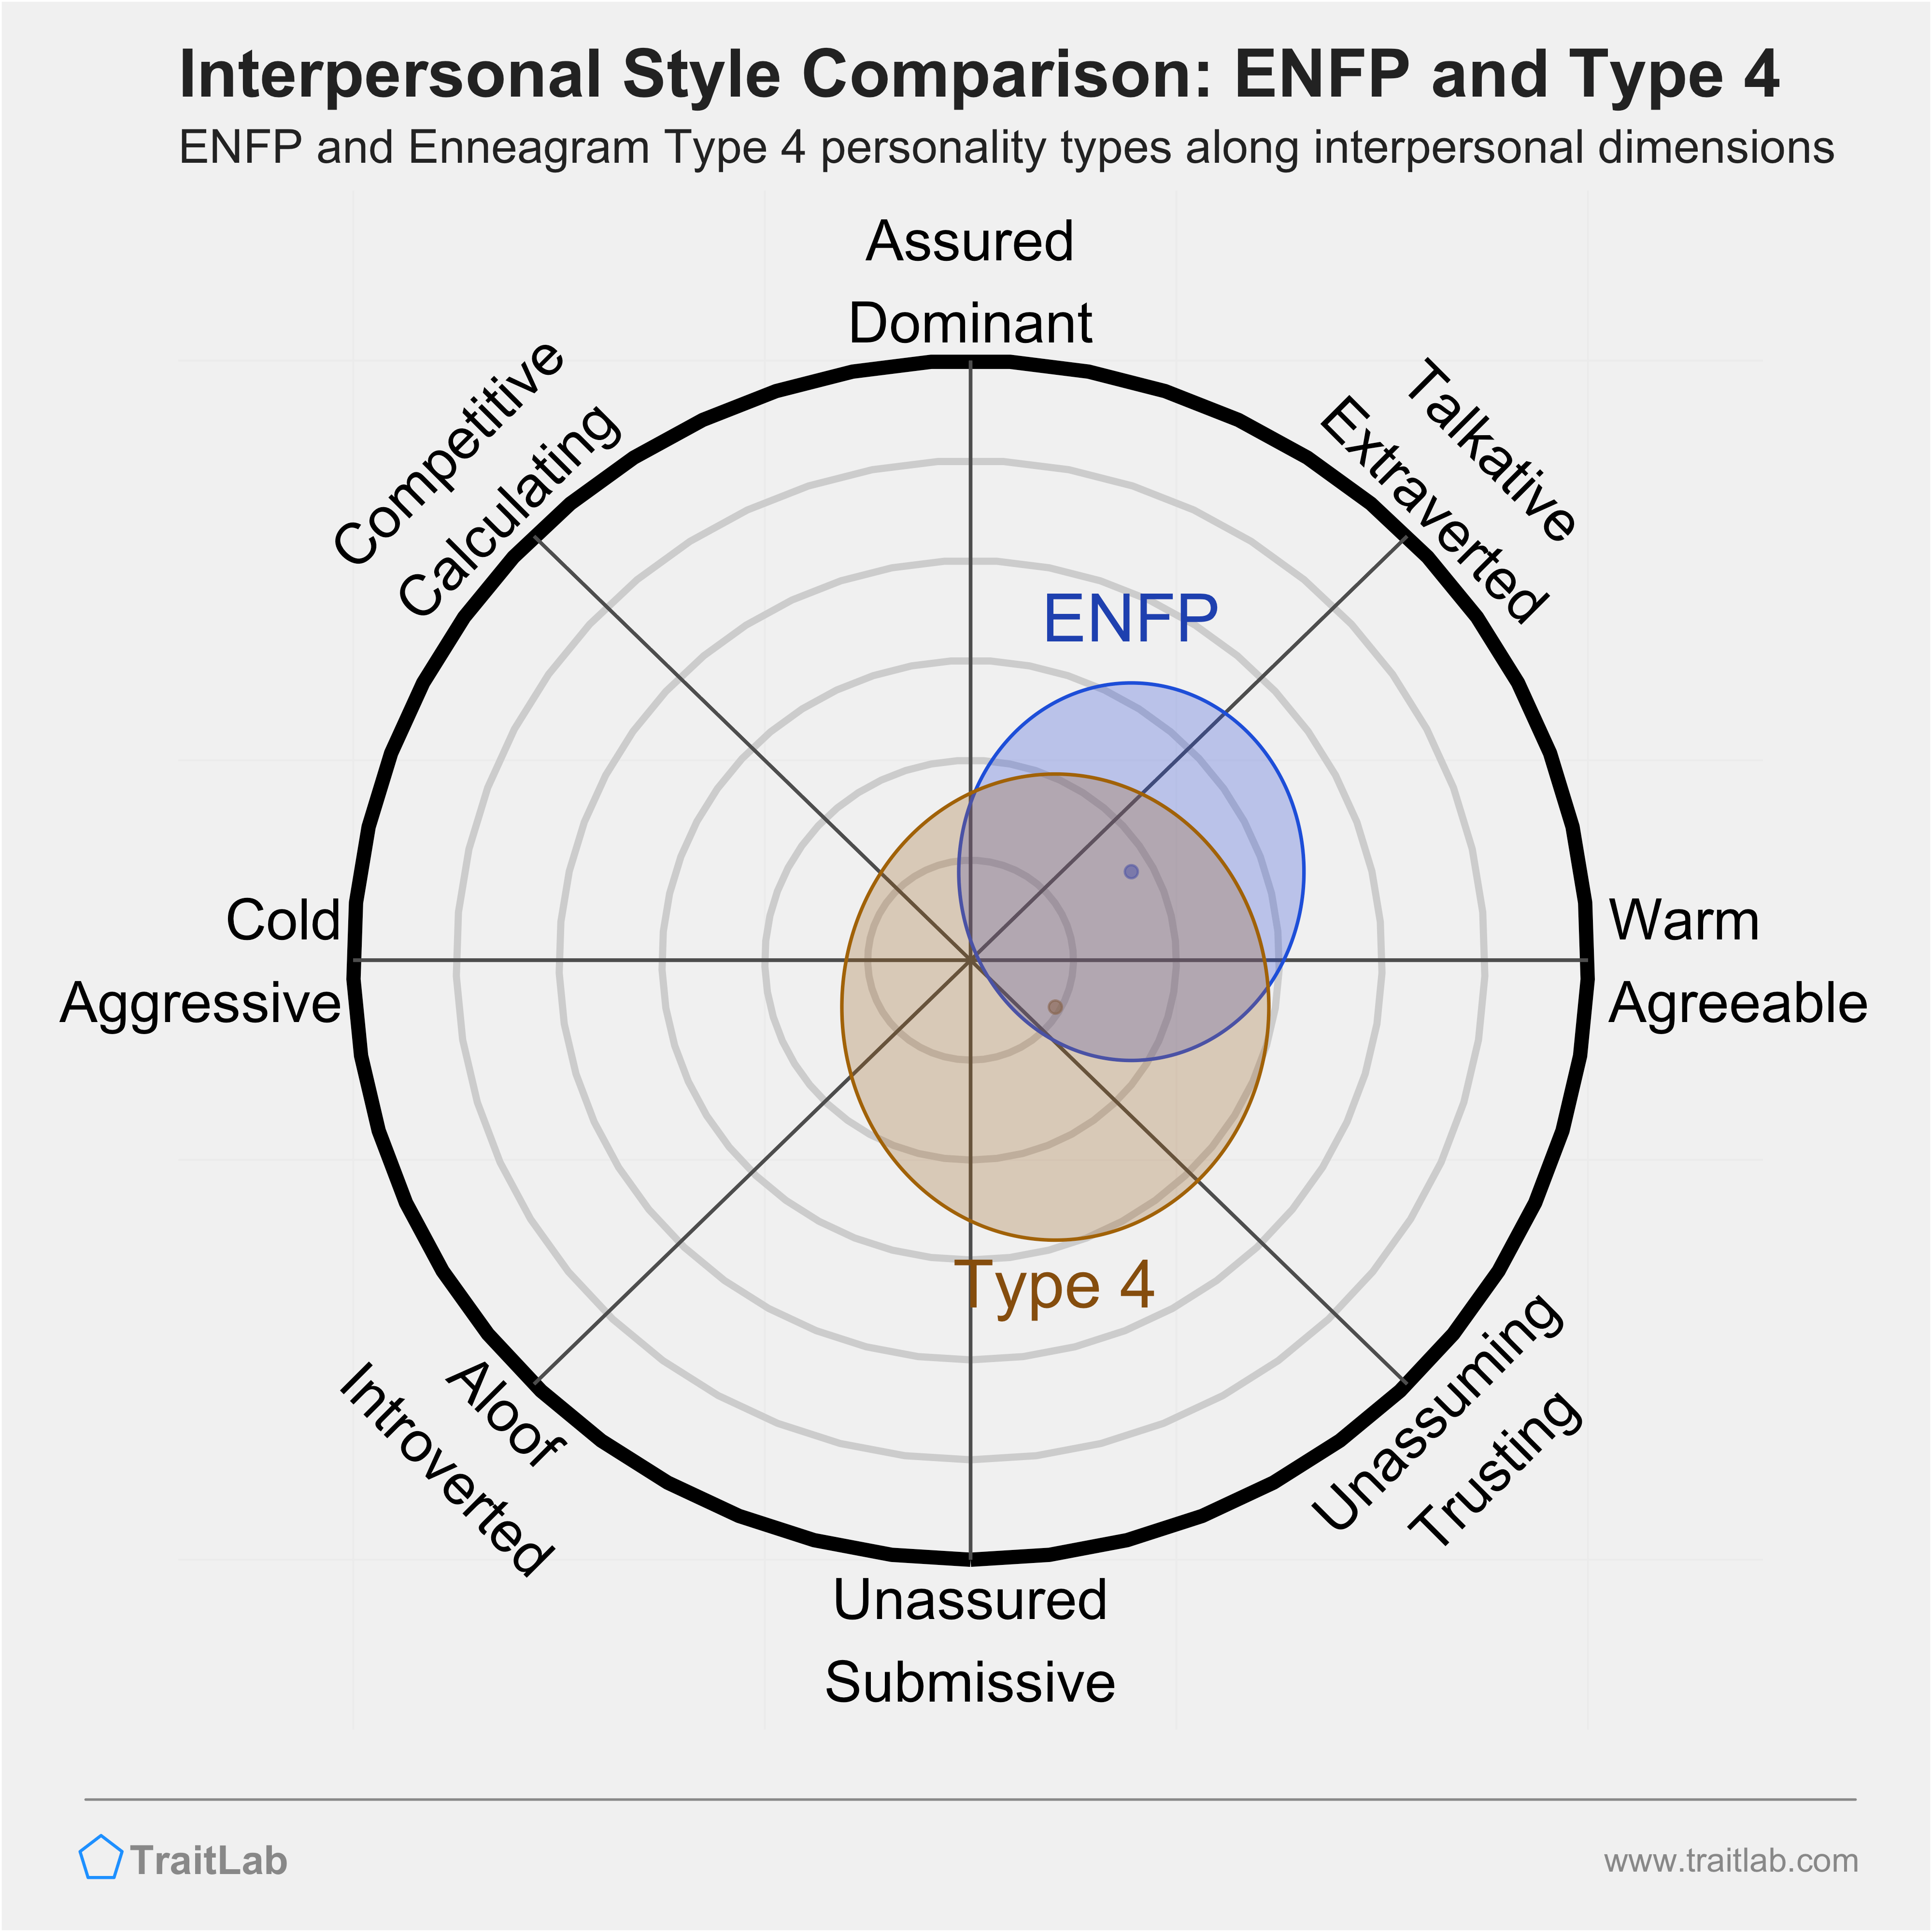 Enneagram ENFP and Type 4 comparison across interpersonal dimensions